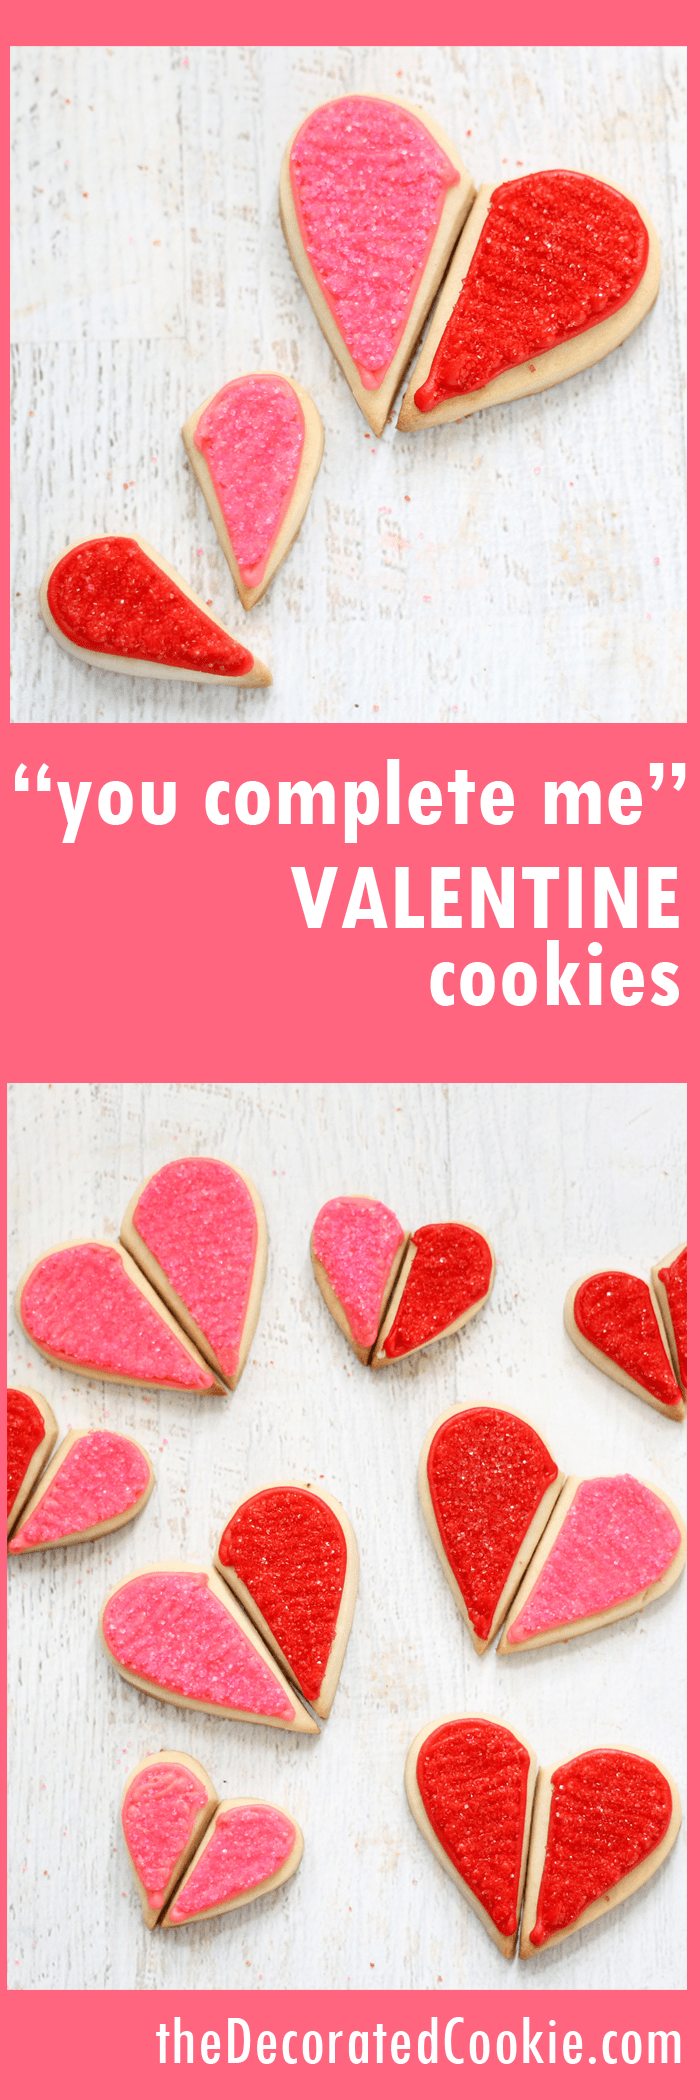 "you complete me" heart cookies for Valentine's Day